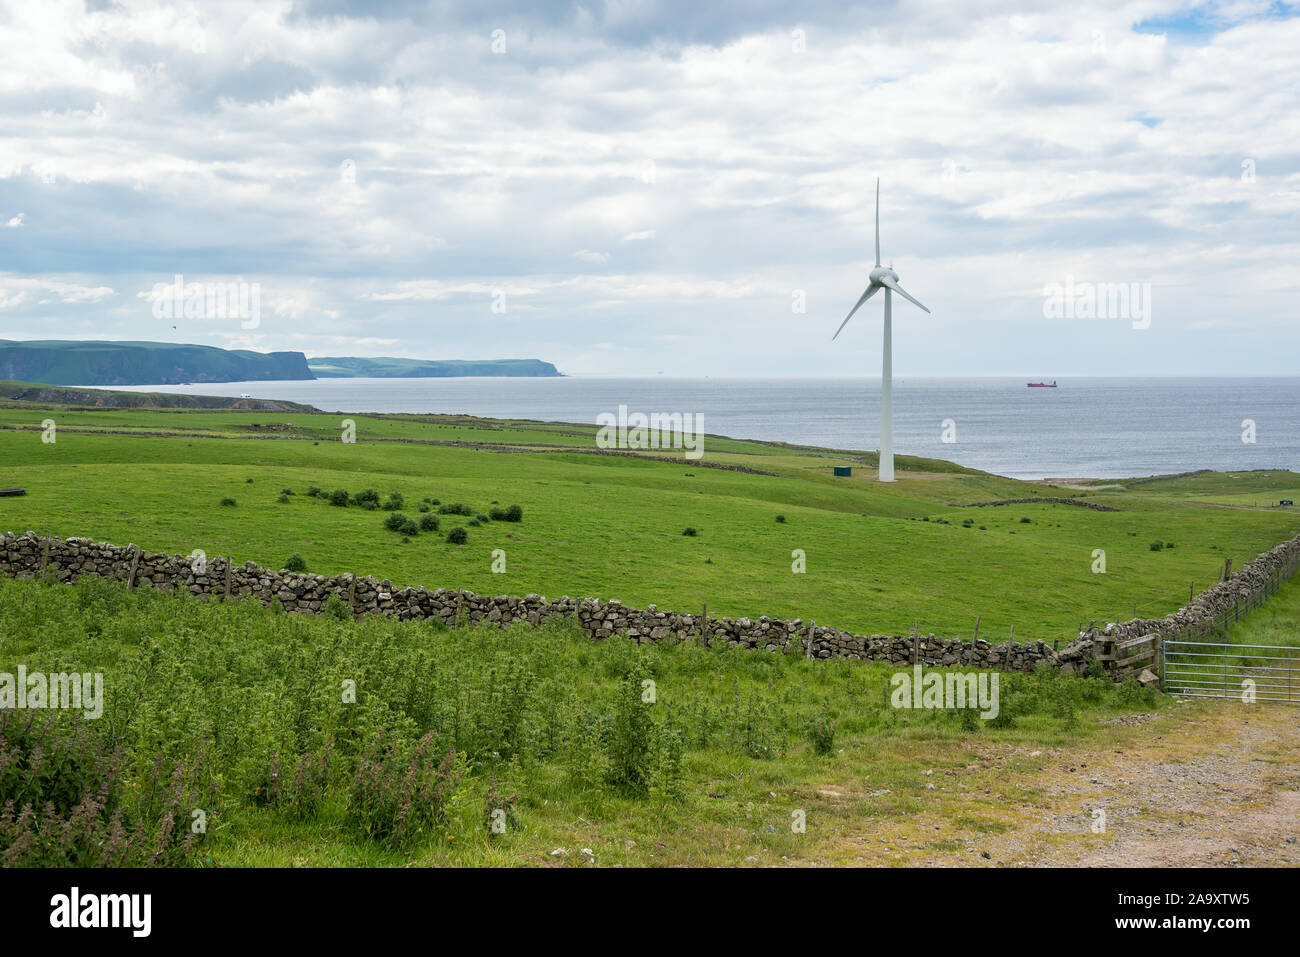 Wind turbine in walled field along the coast on a cloudy spring day. Towering cliffs are visible in background. Scotland, UK. Stock Photo